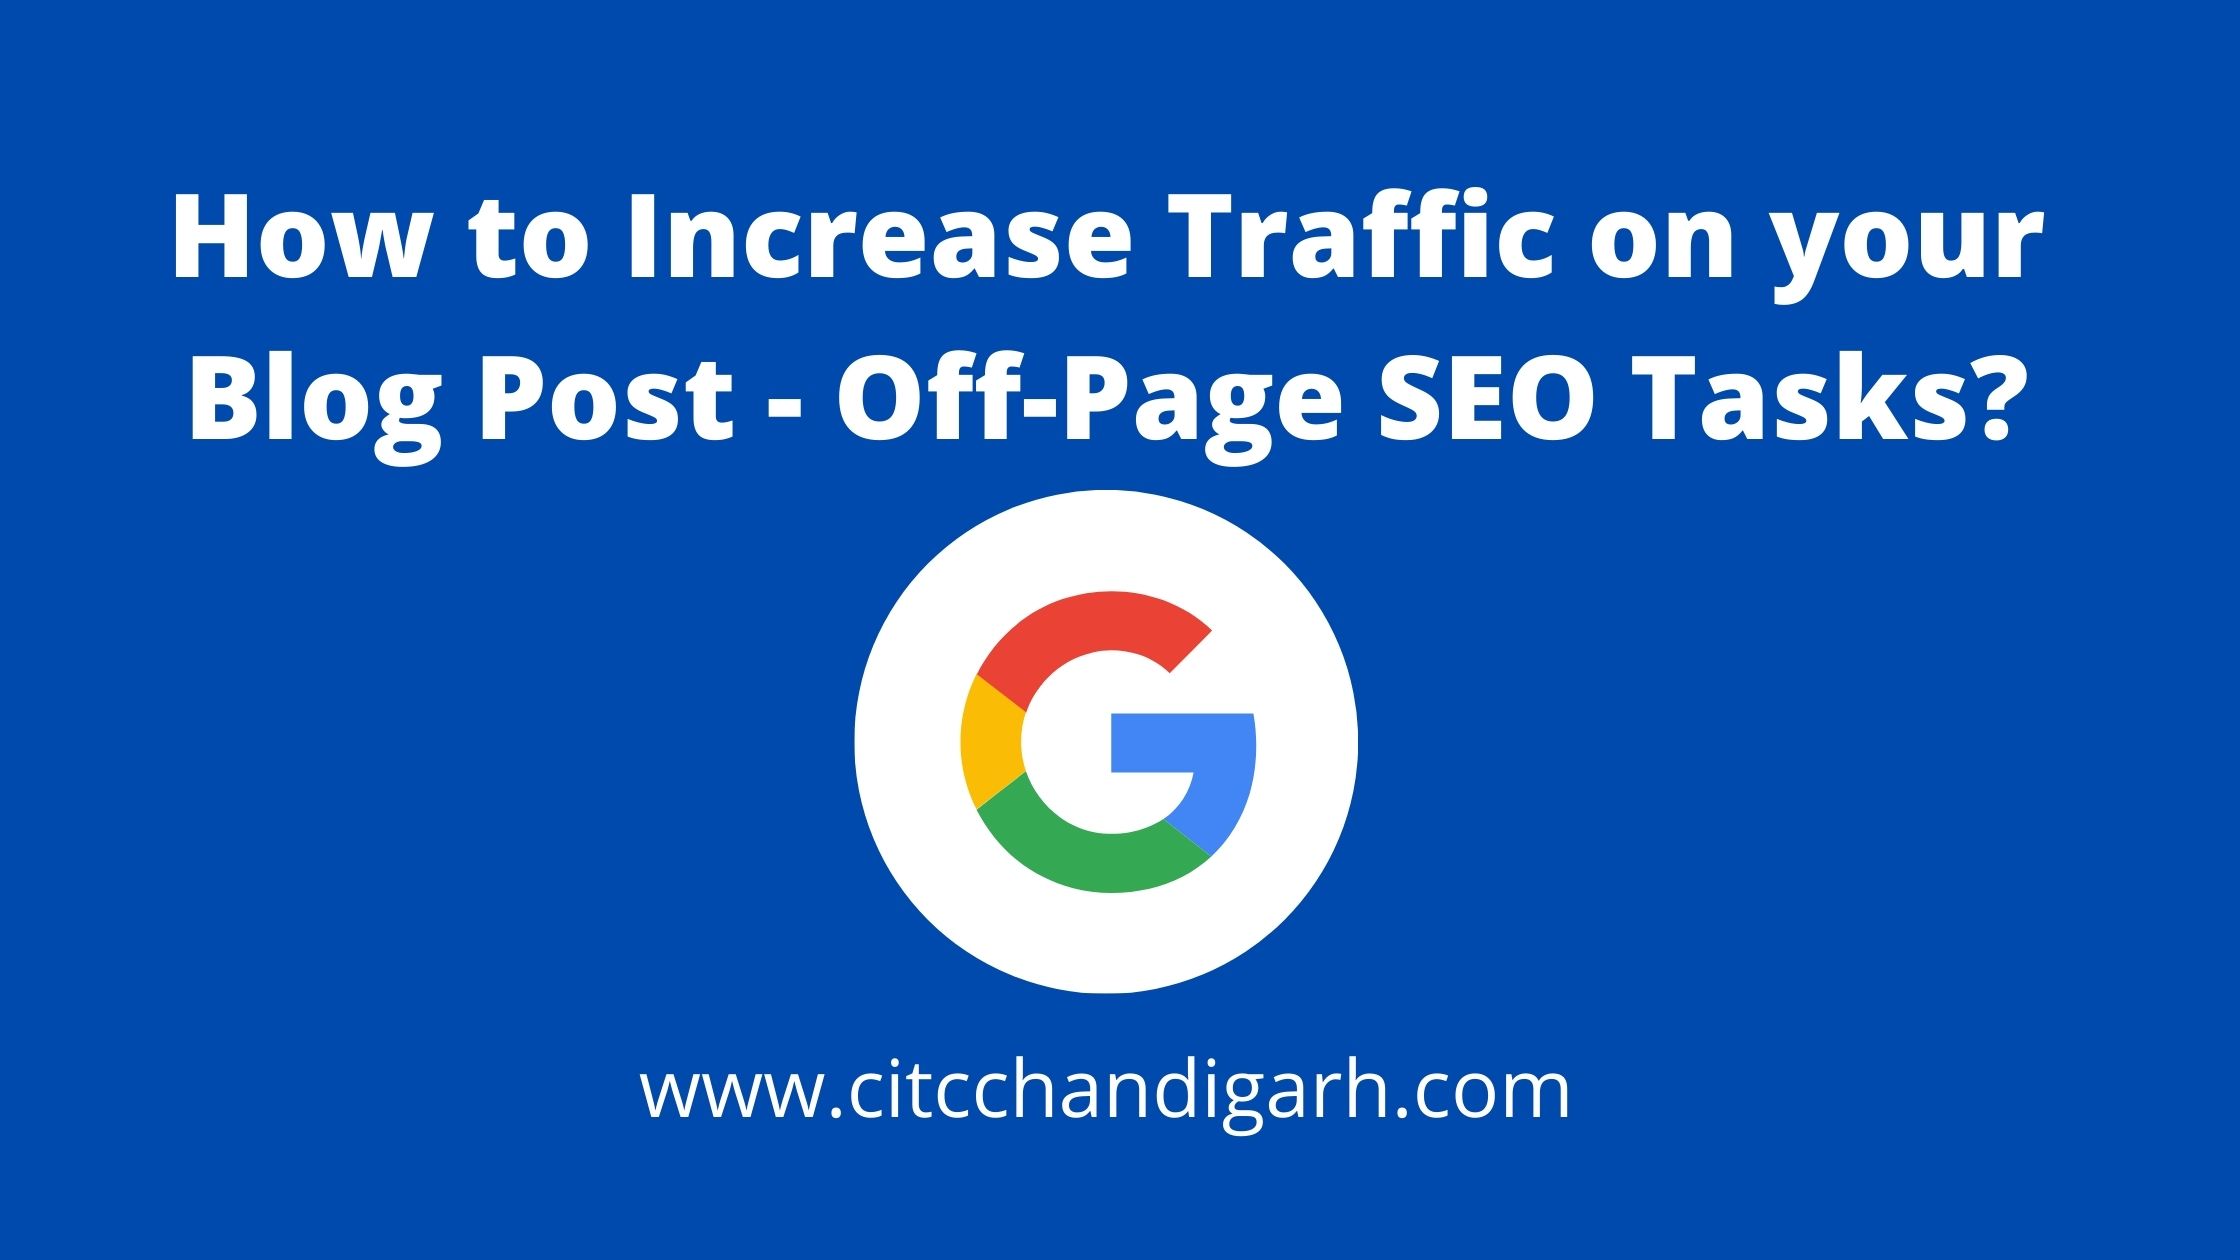 How to Increase Traffic on your Blog Post - Off-Page SEO Tasks